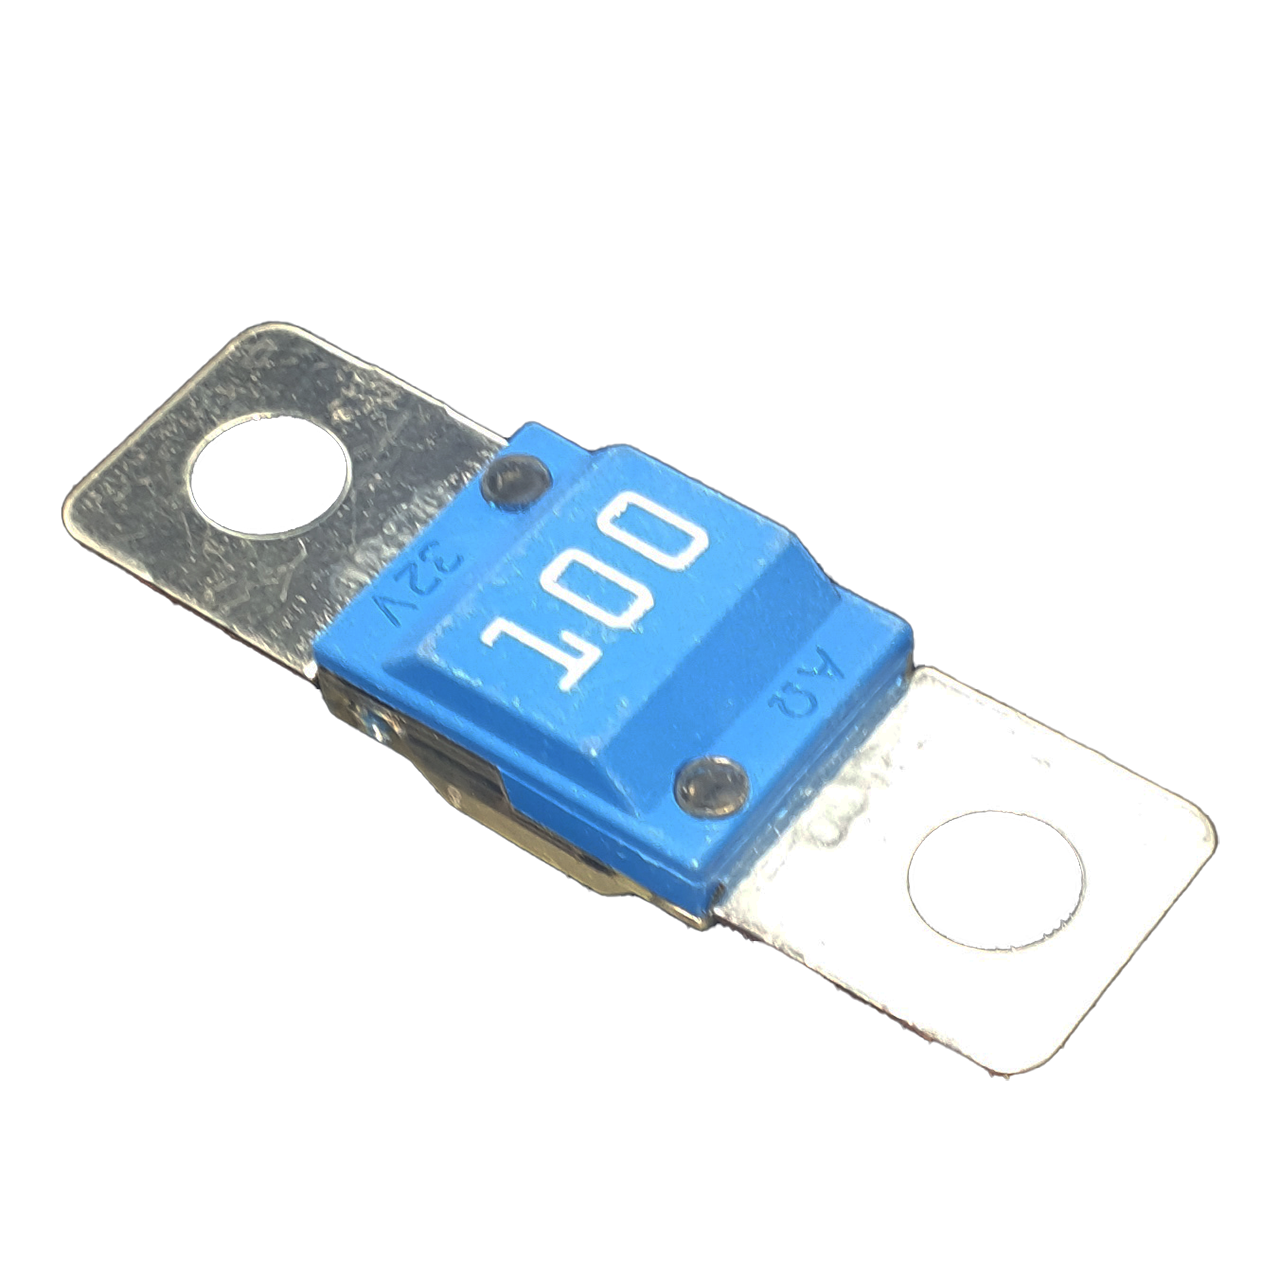 Midi Fuse Holder, bolt on up to 100A